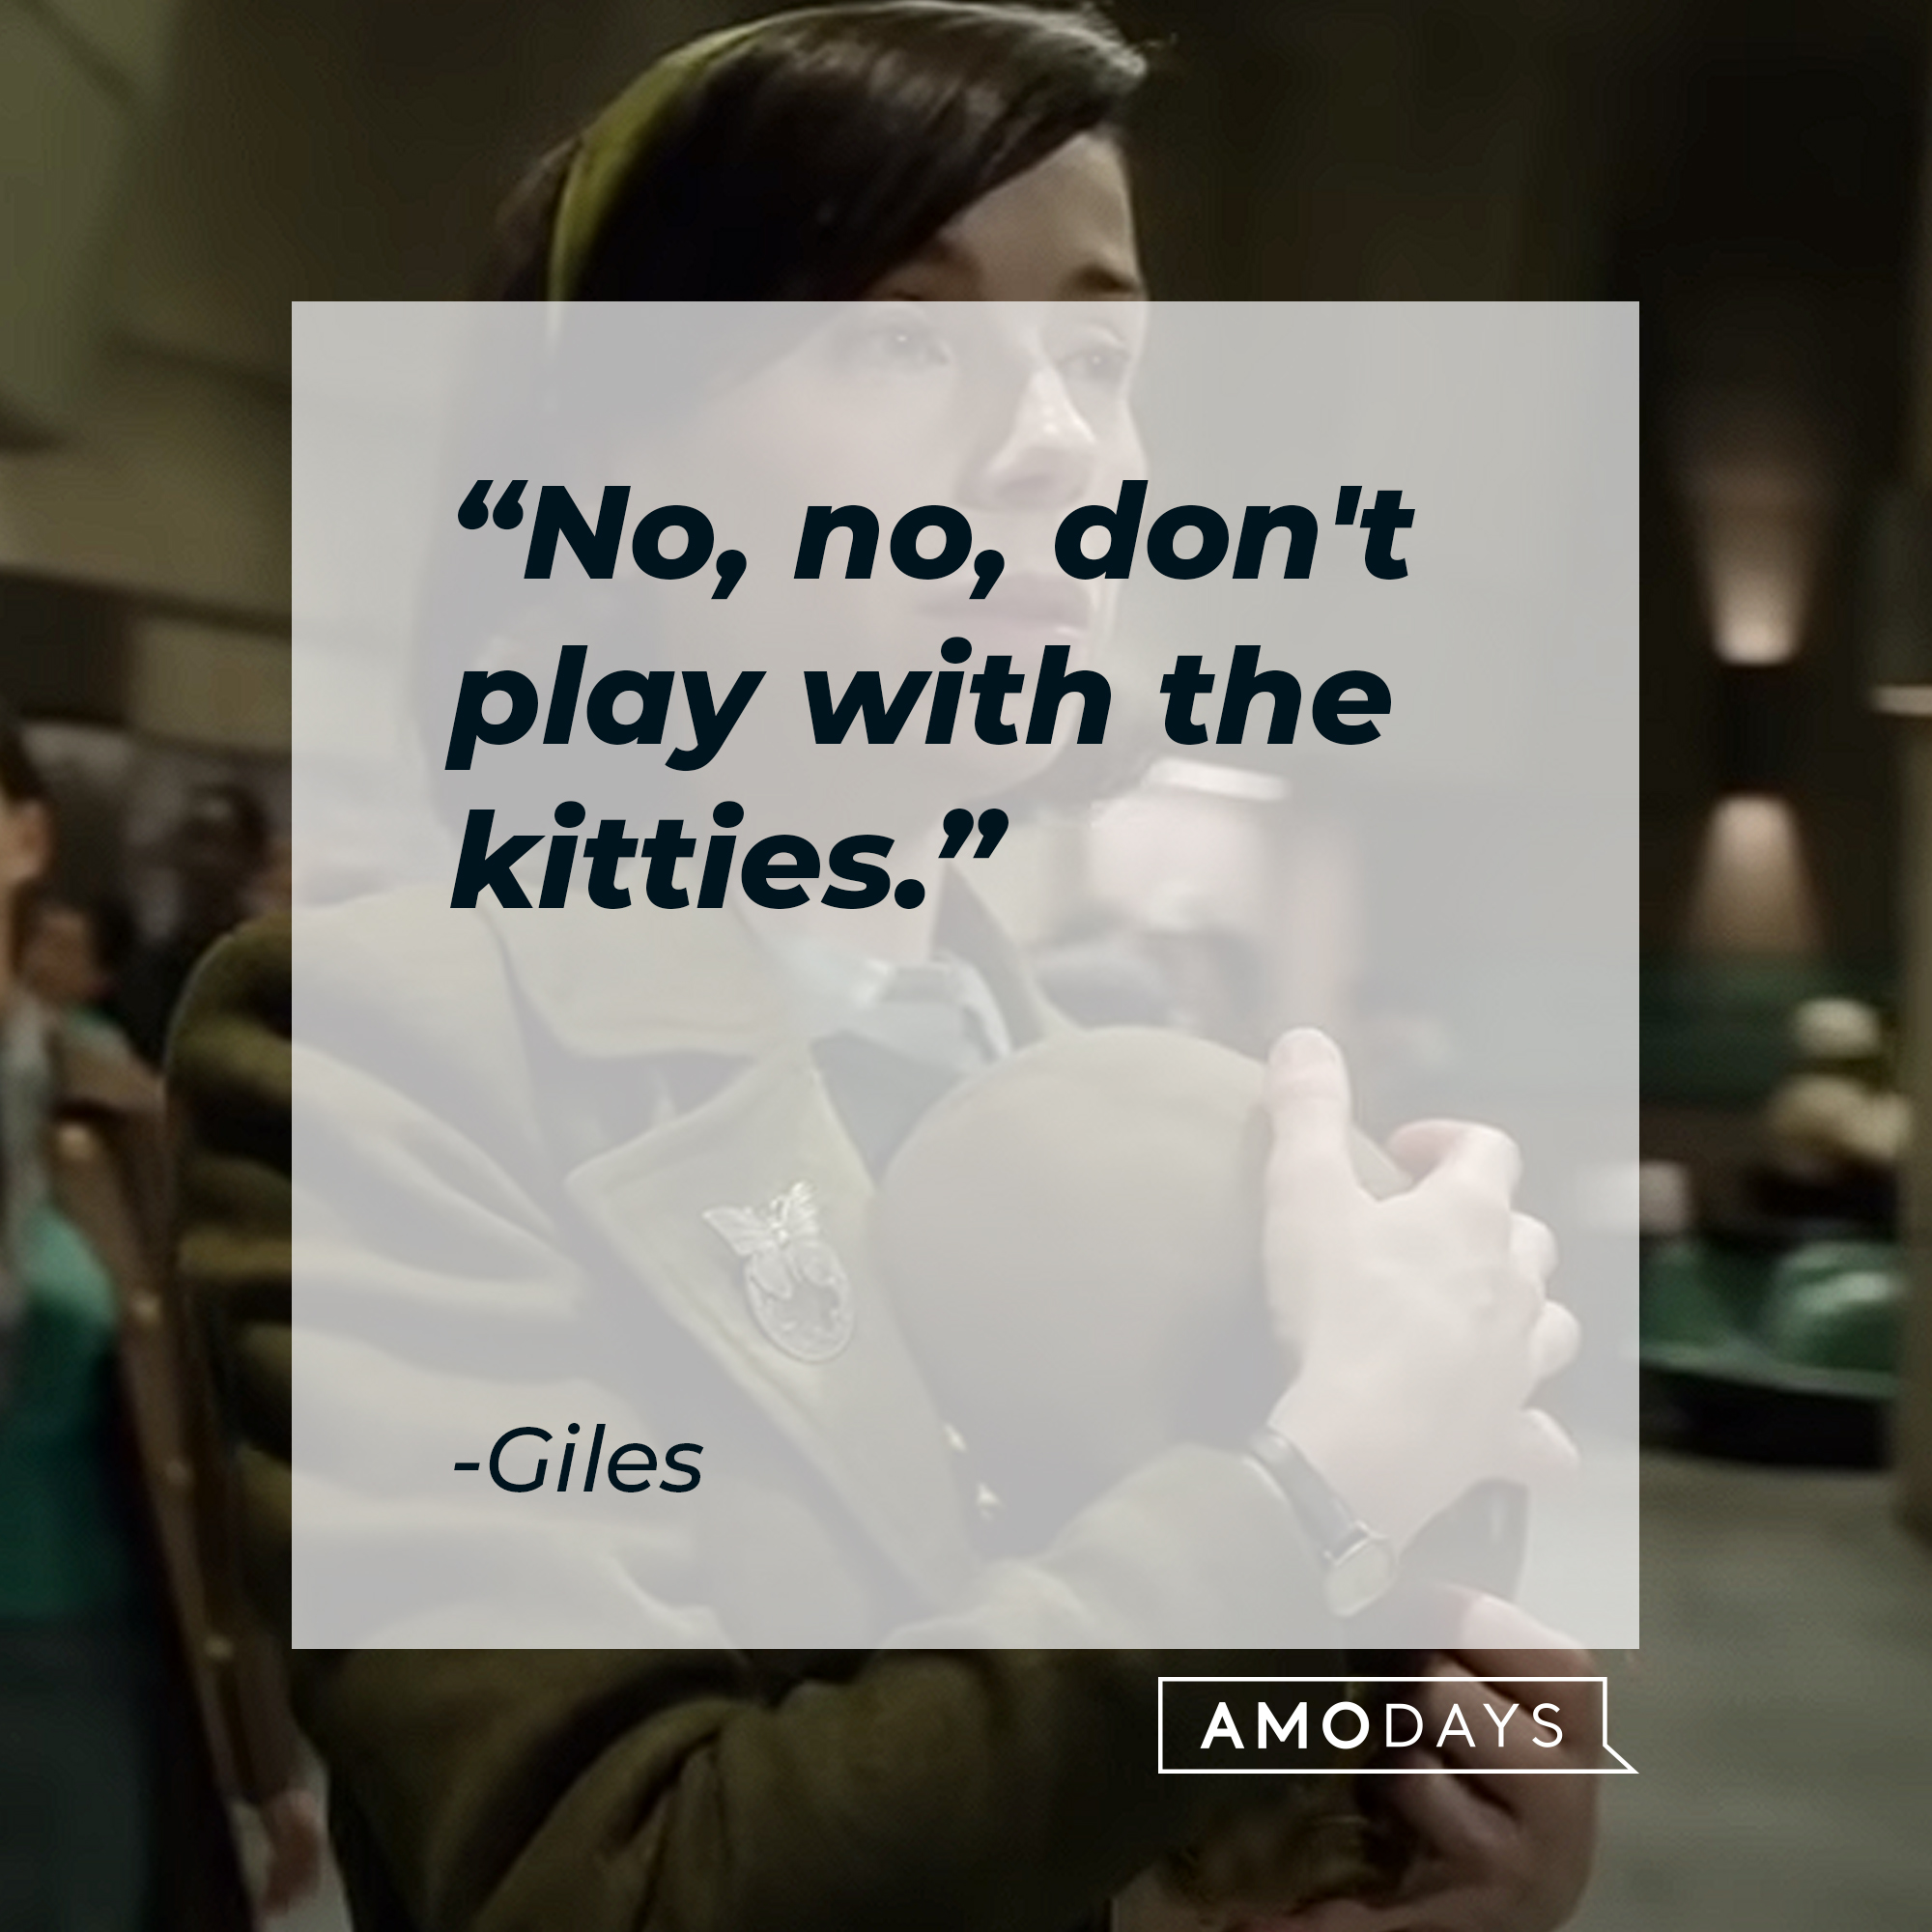 Giles's quote : “No, no, don’t play with the kitties.” | Source:youtube.com/searchlightpictures